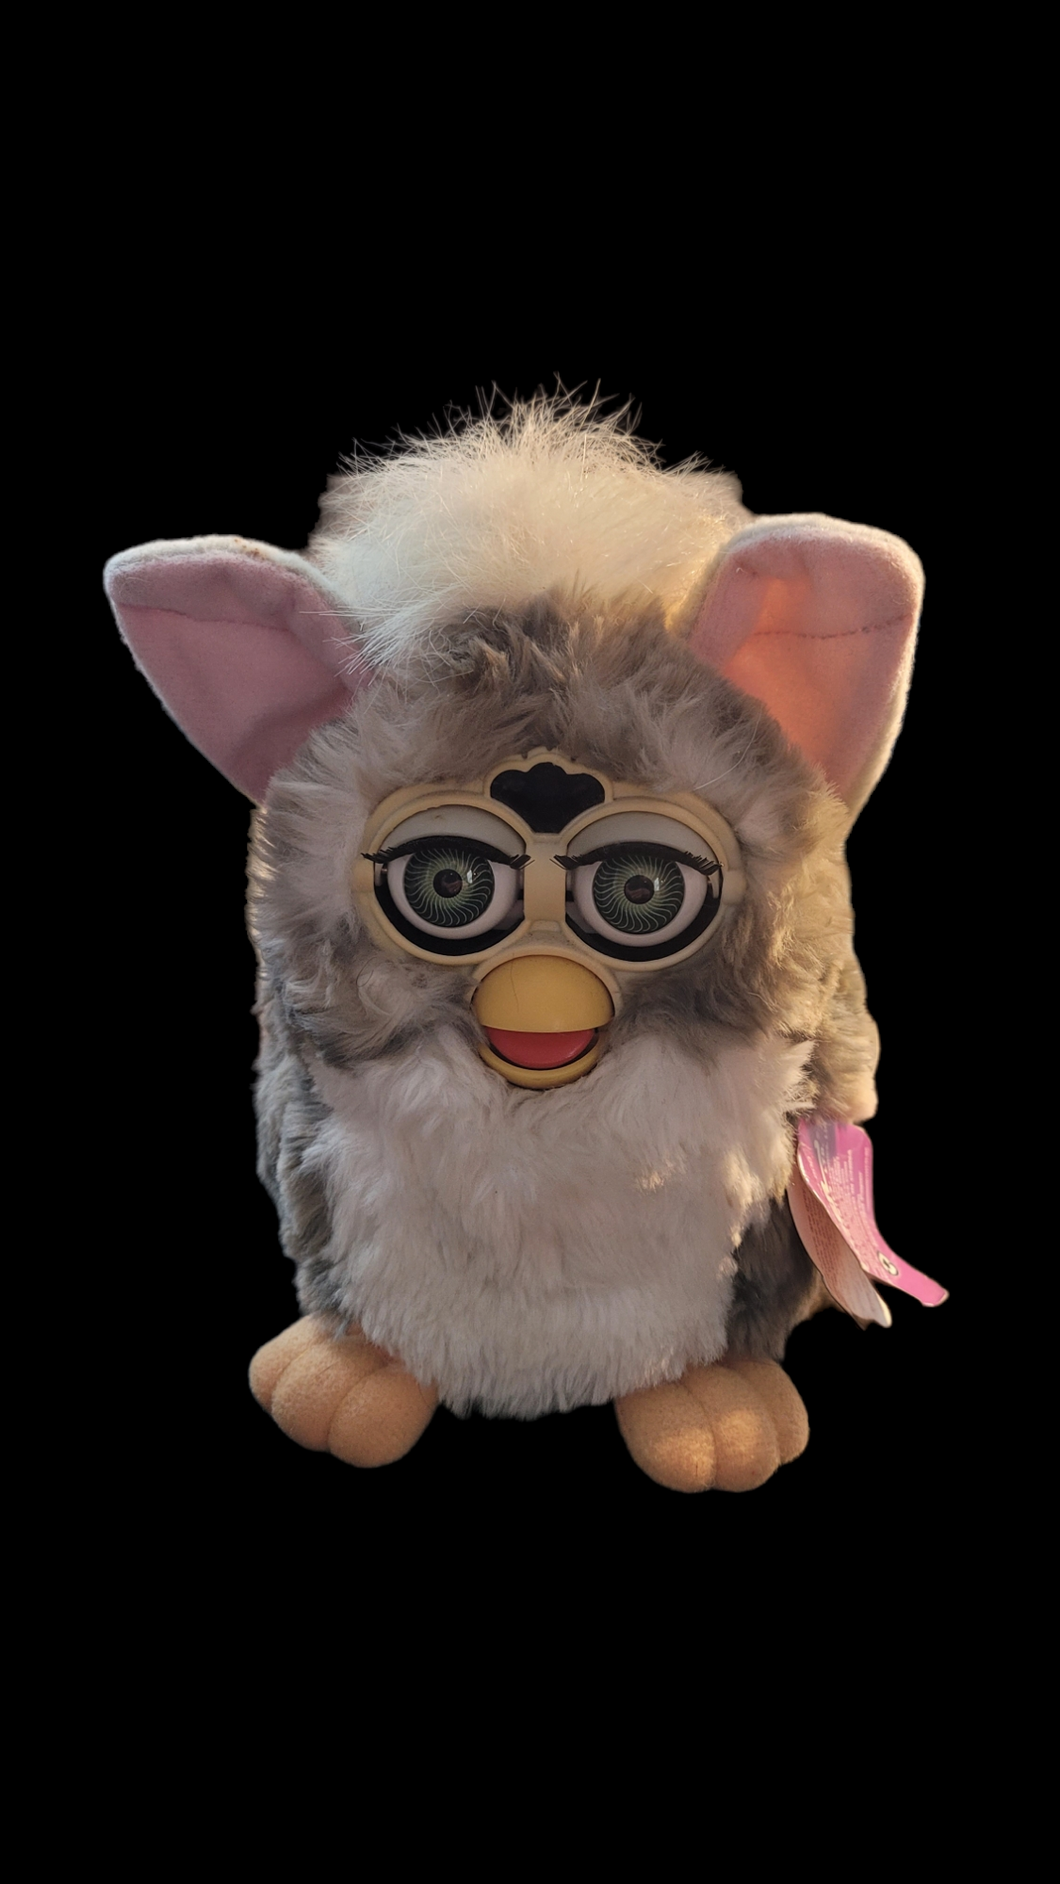 Original Furby 1998 by Tiger Electronics Used Model 70-800 with